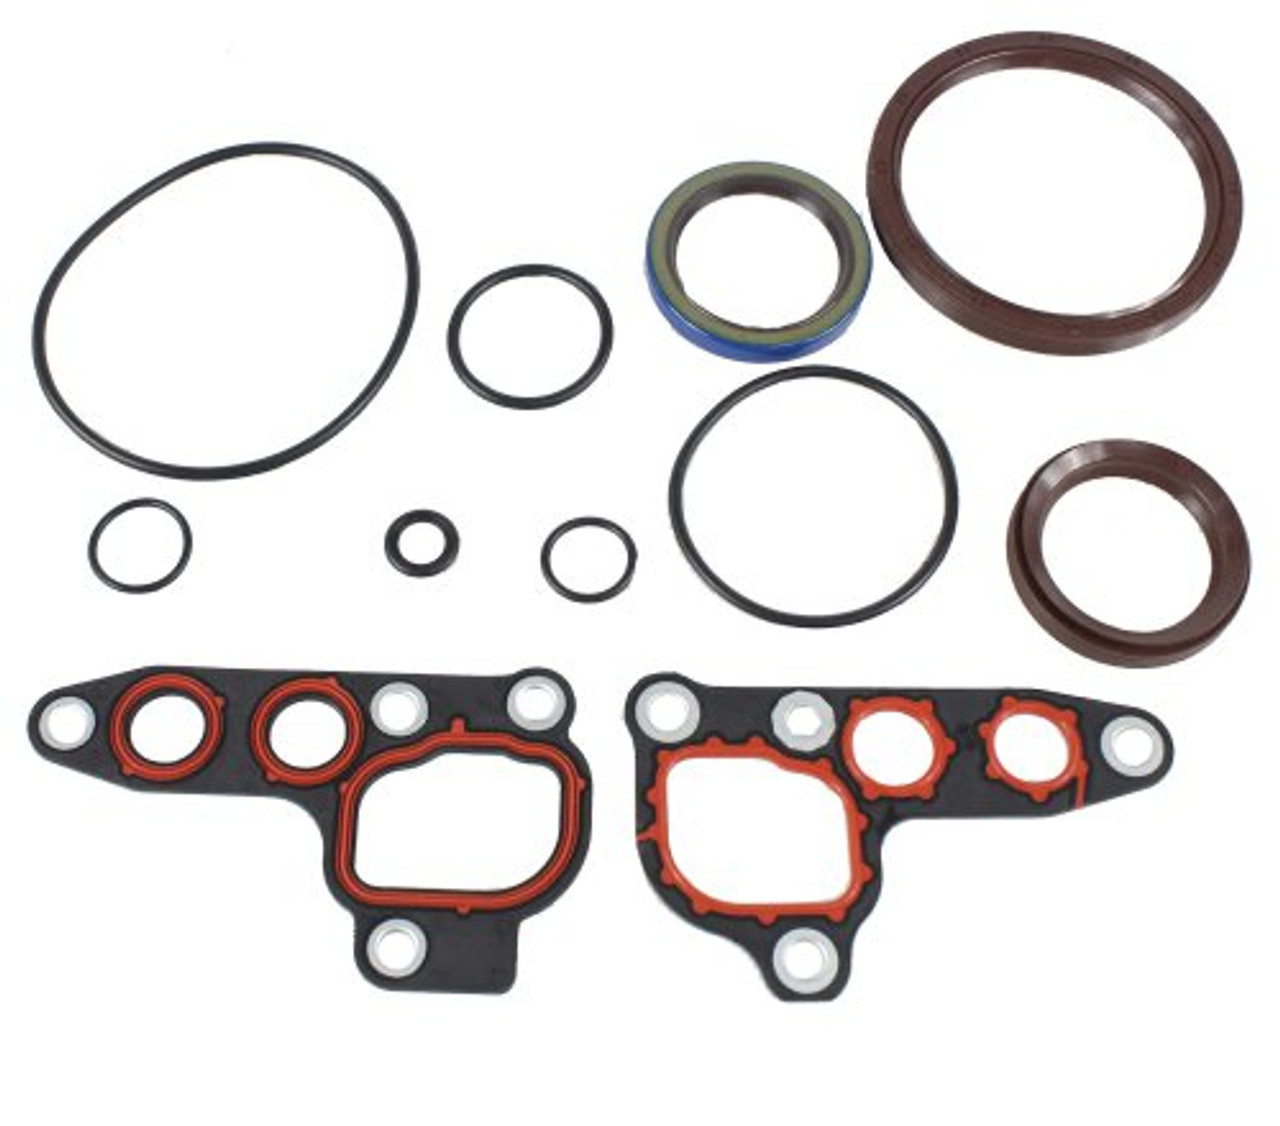 Lower Gasket Set - 2000 Ford Expedition 4.6L Engine Parts # LGS4150ZE153